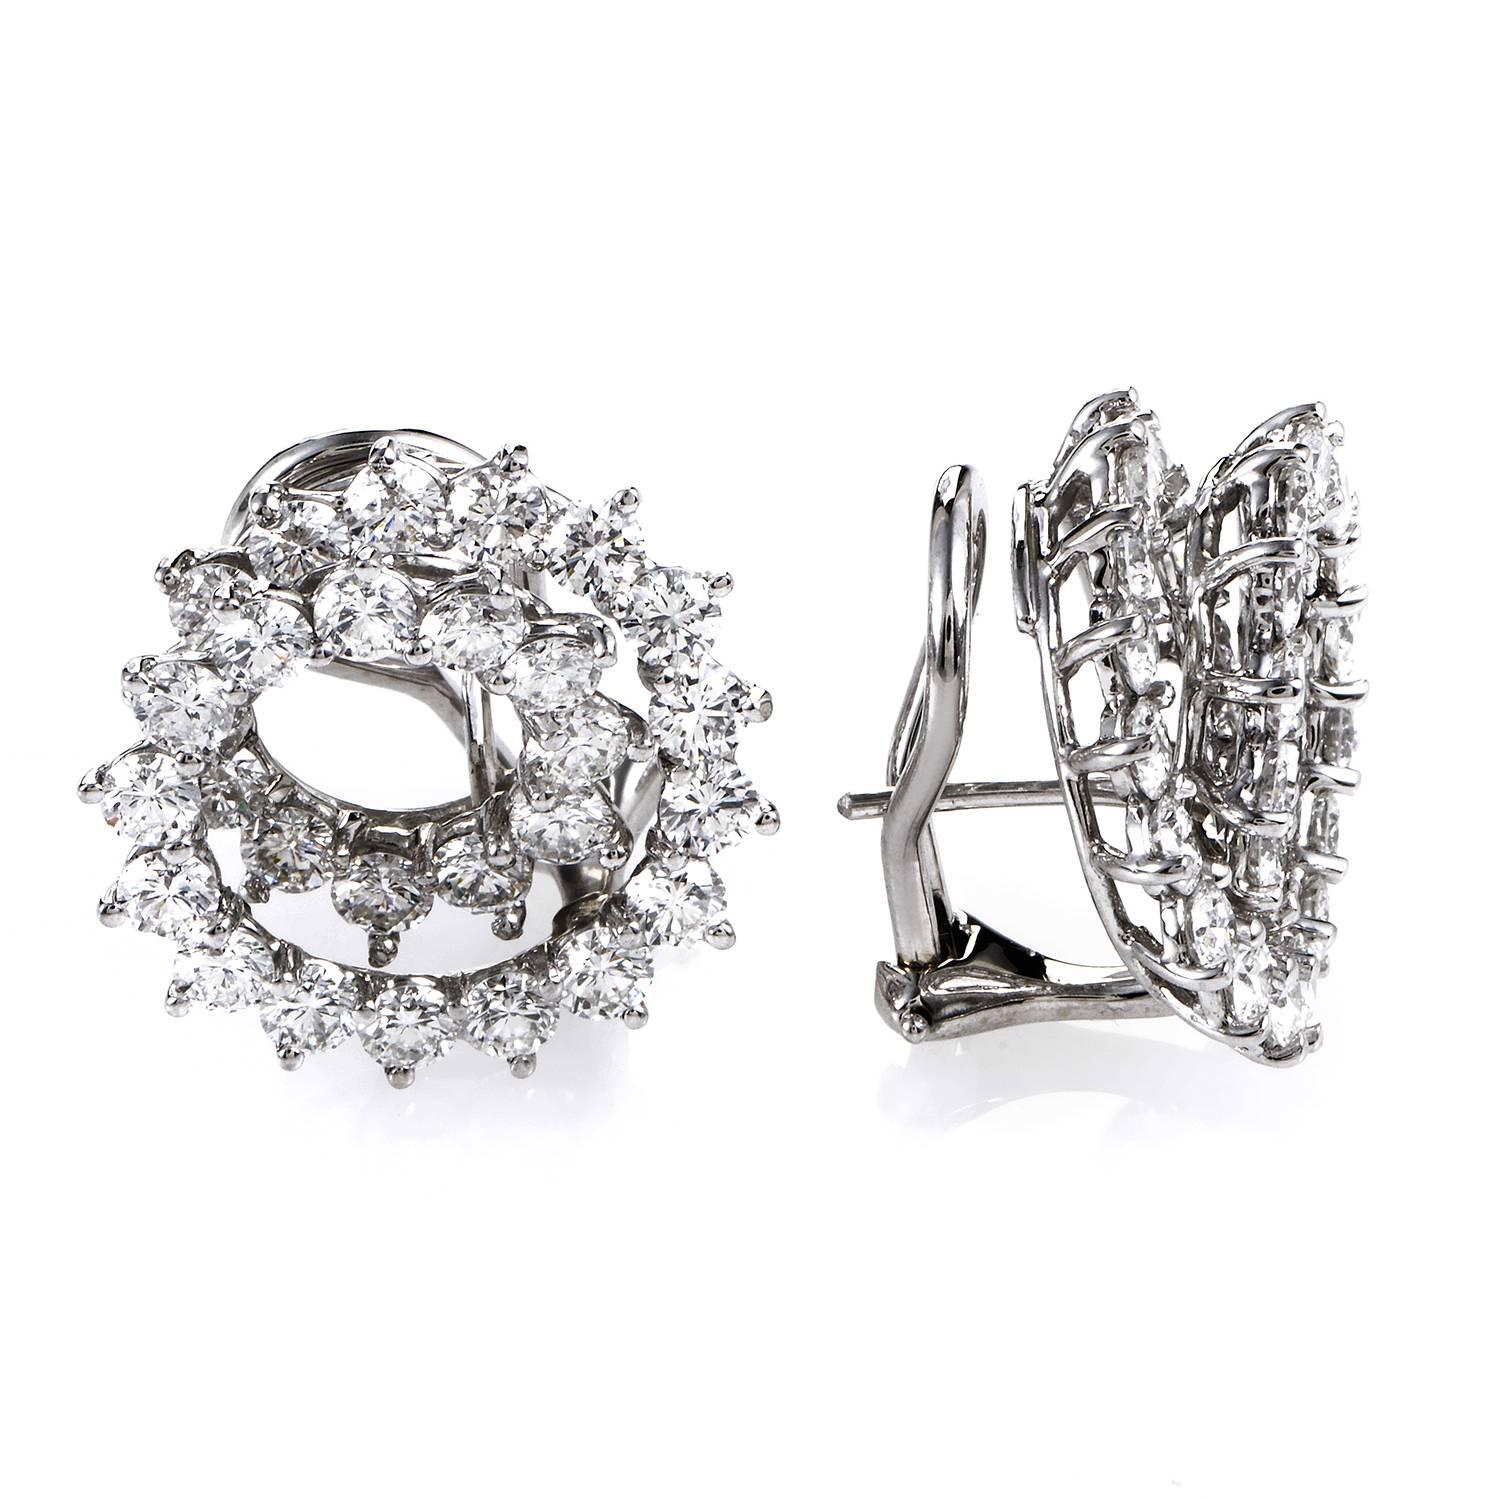 Heart-warming brilliance of spellbinding diamonds weighing in total approximately 3.30 carats embellishes the intriguingly spiraling platinum body for majestic allure in these extraordinary earrings designed by Angela Cummings for Tiffany &